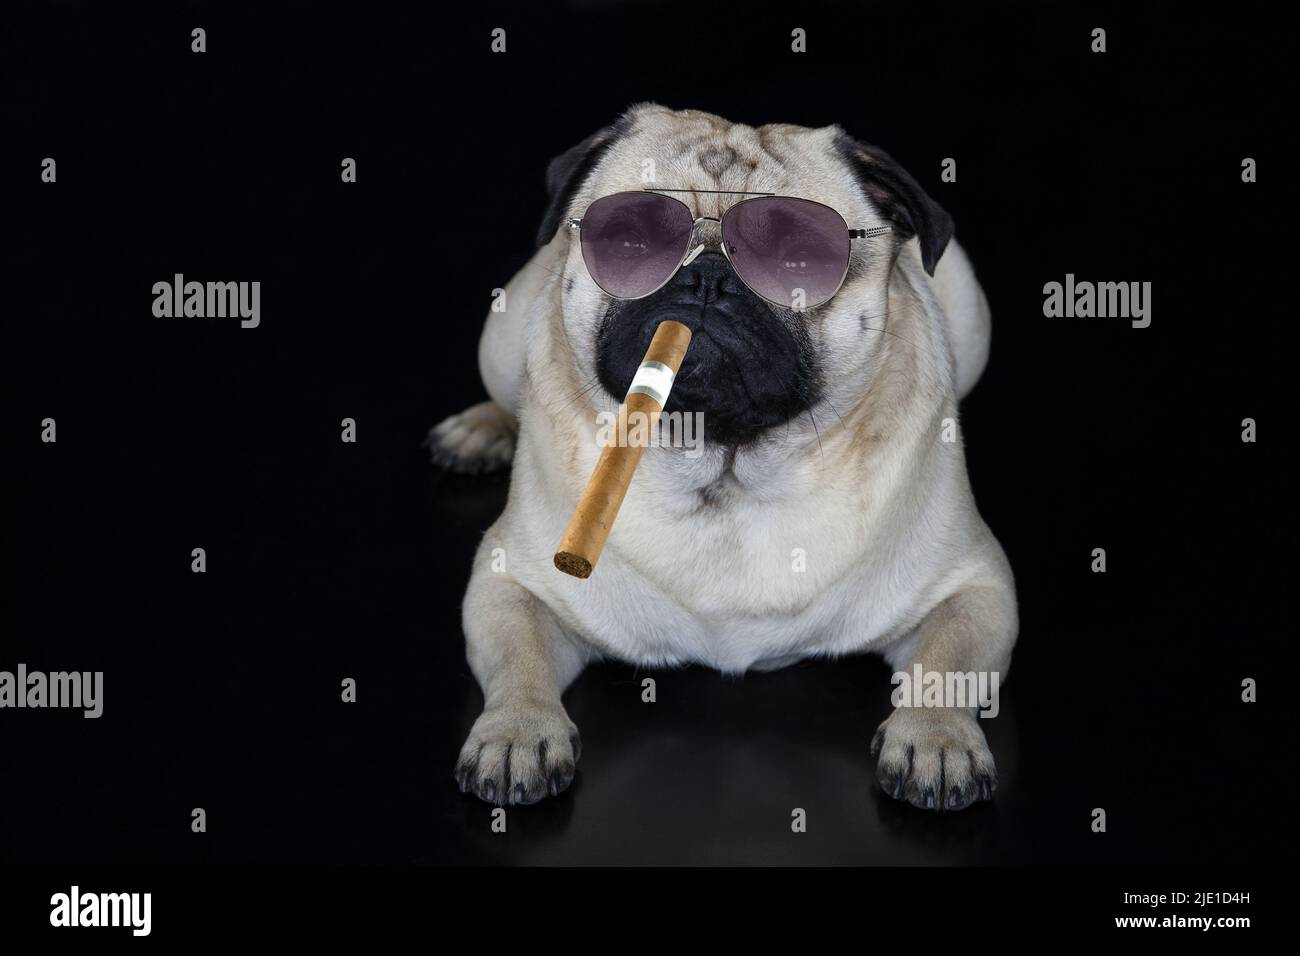 I'm the boss. A pug with sunglasses and a cigar against a black background. Stock Photo